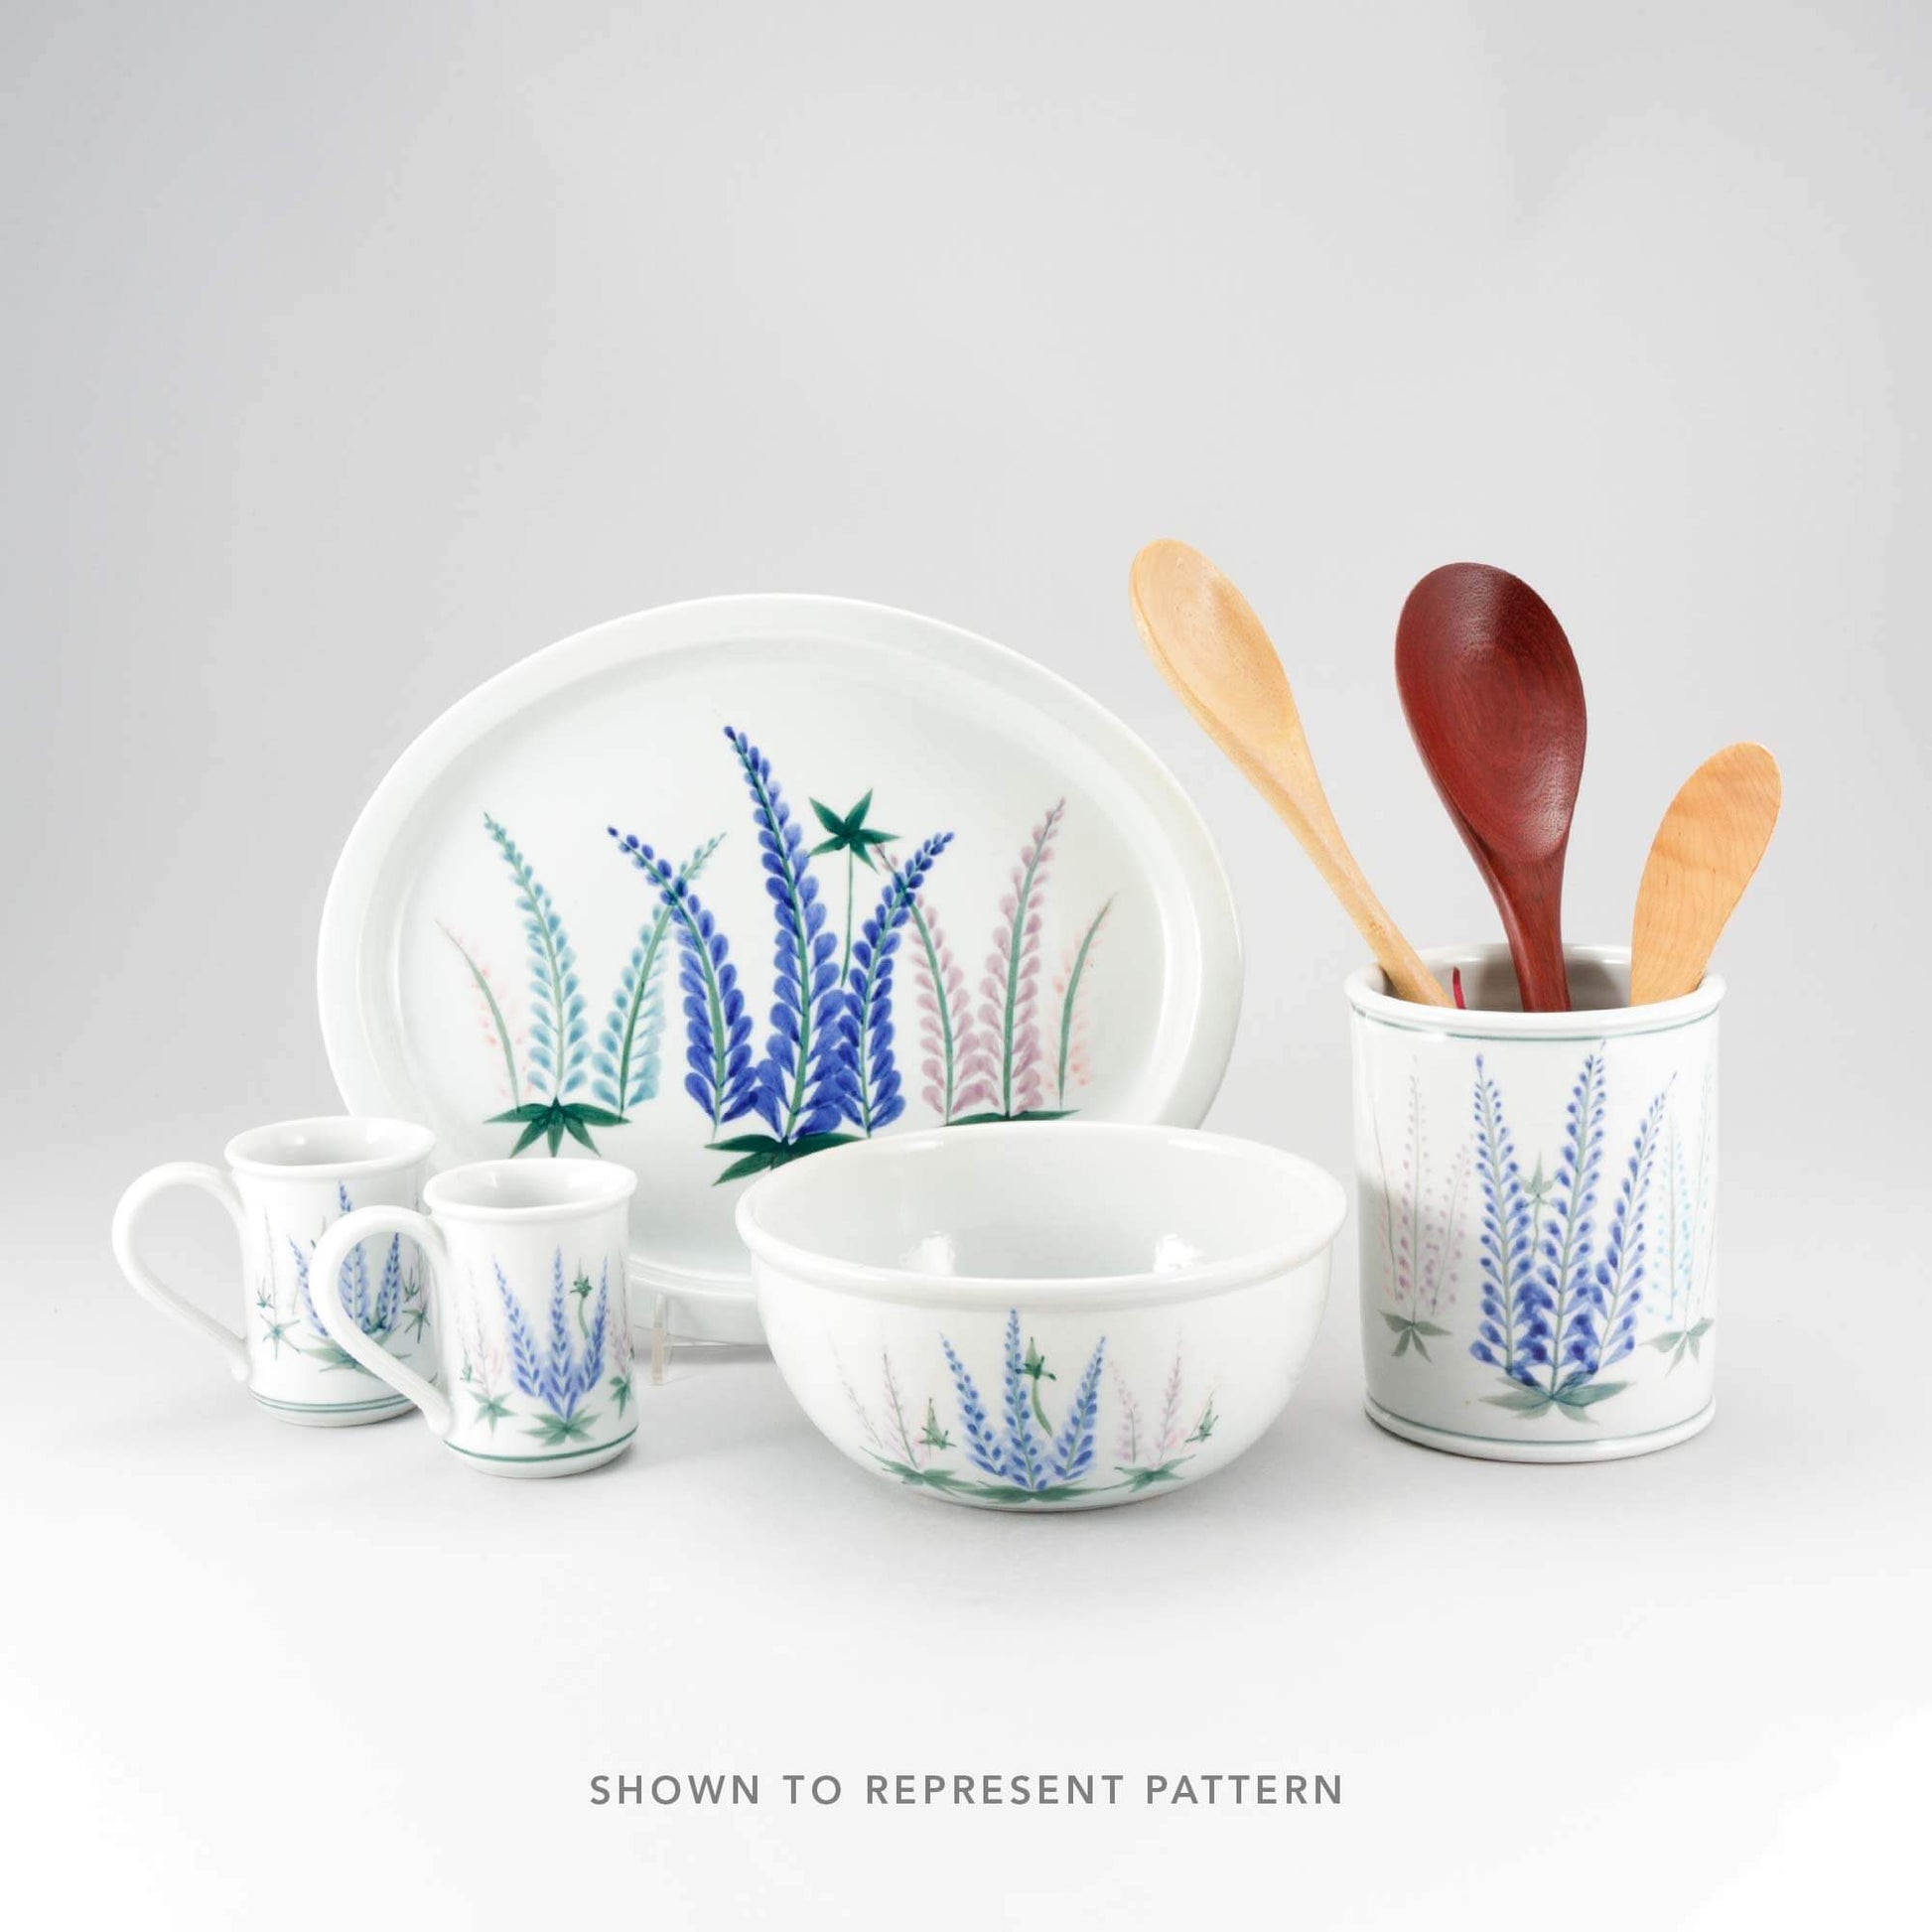 Handmade Pottery Brie Baker in Lupine pattern made by Georgetown Pottery in Maine